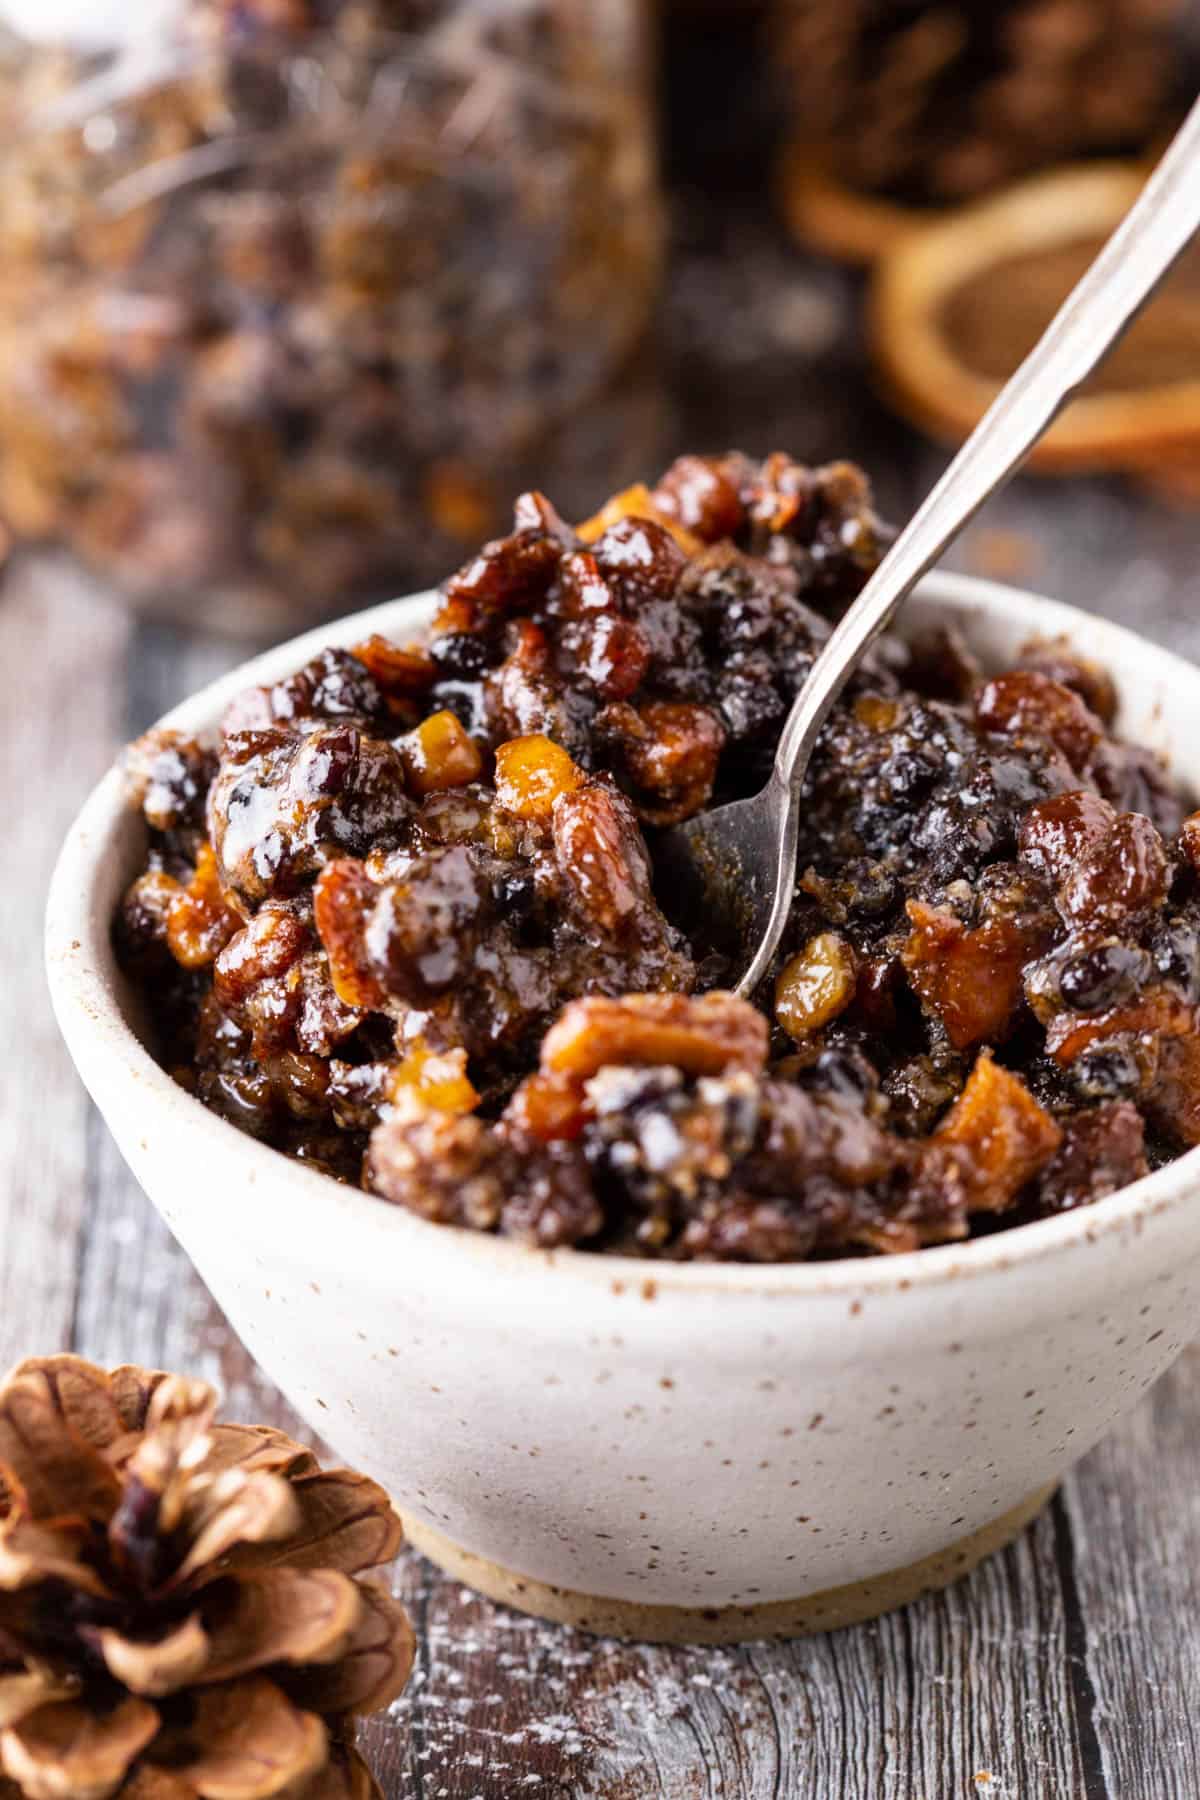 mincemeat in a bowl with the plump fruits glistening.